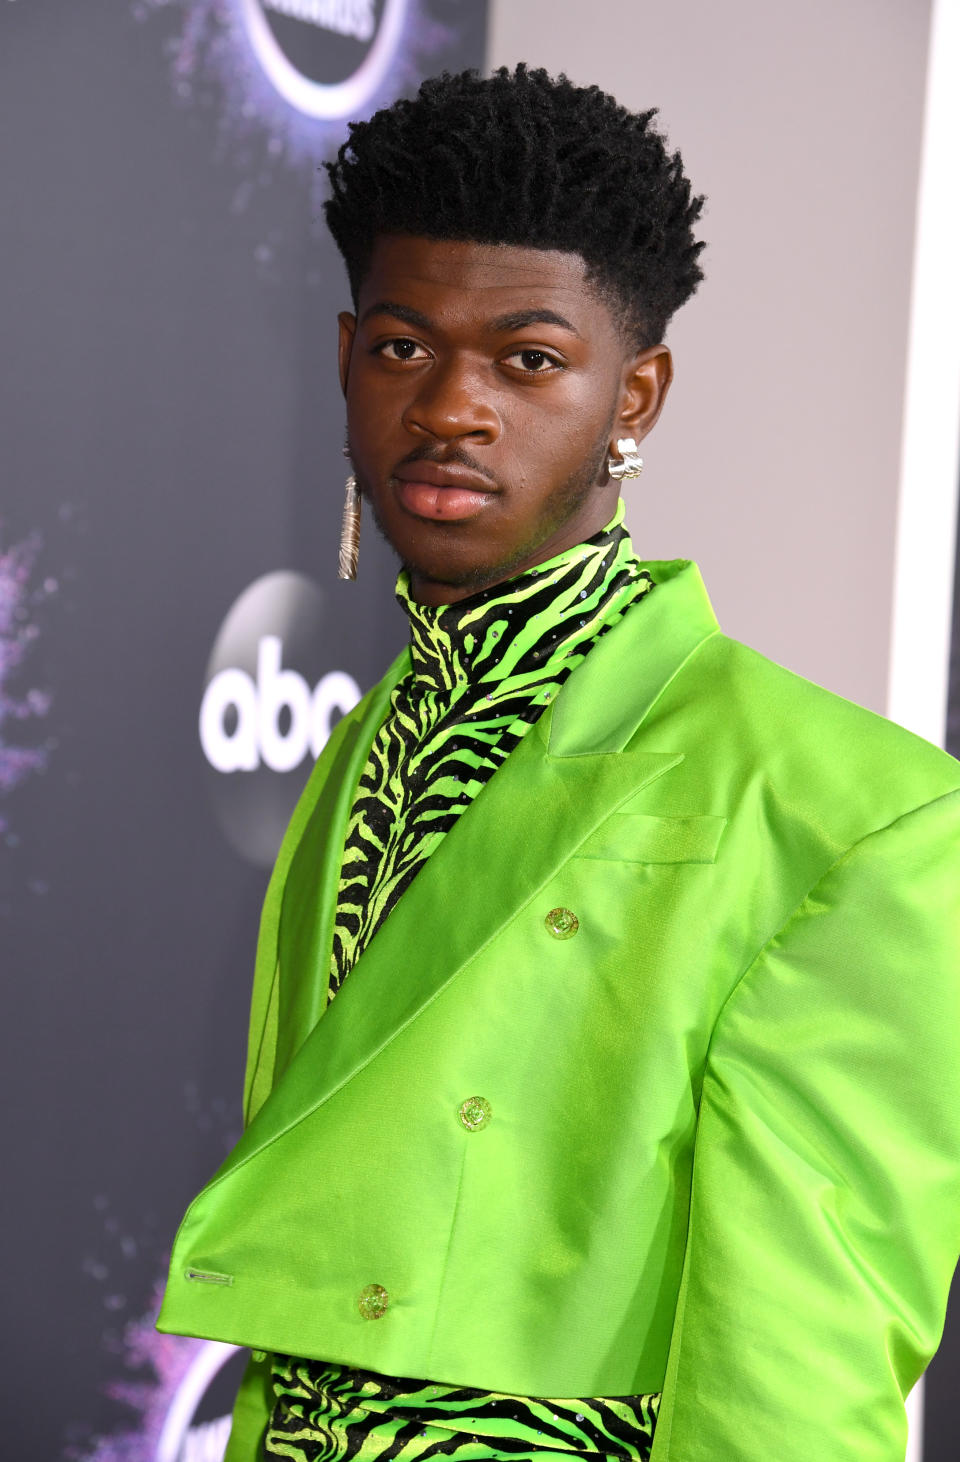 Lil' Nas X at a red carpet event, wearing a neon suit with a zebra print turtleneck and a dangling earring